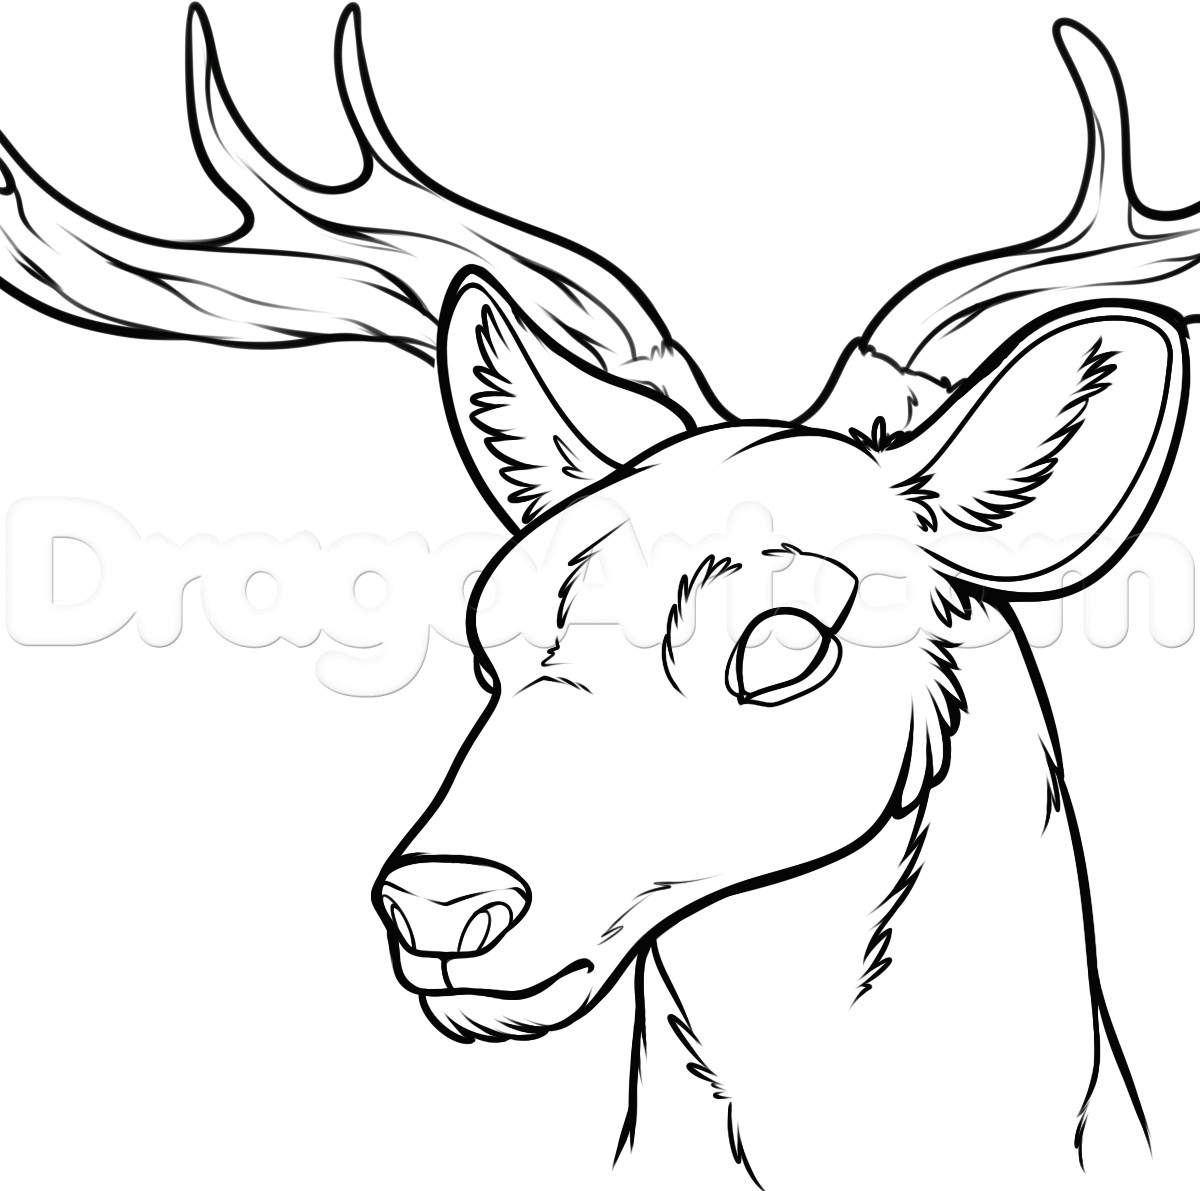 buck head drawing at getdrawings com free for personal use buck